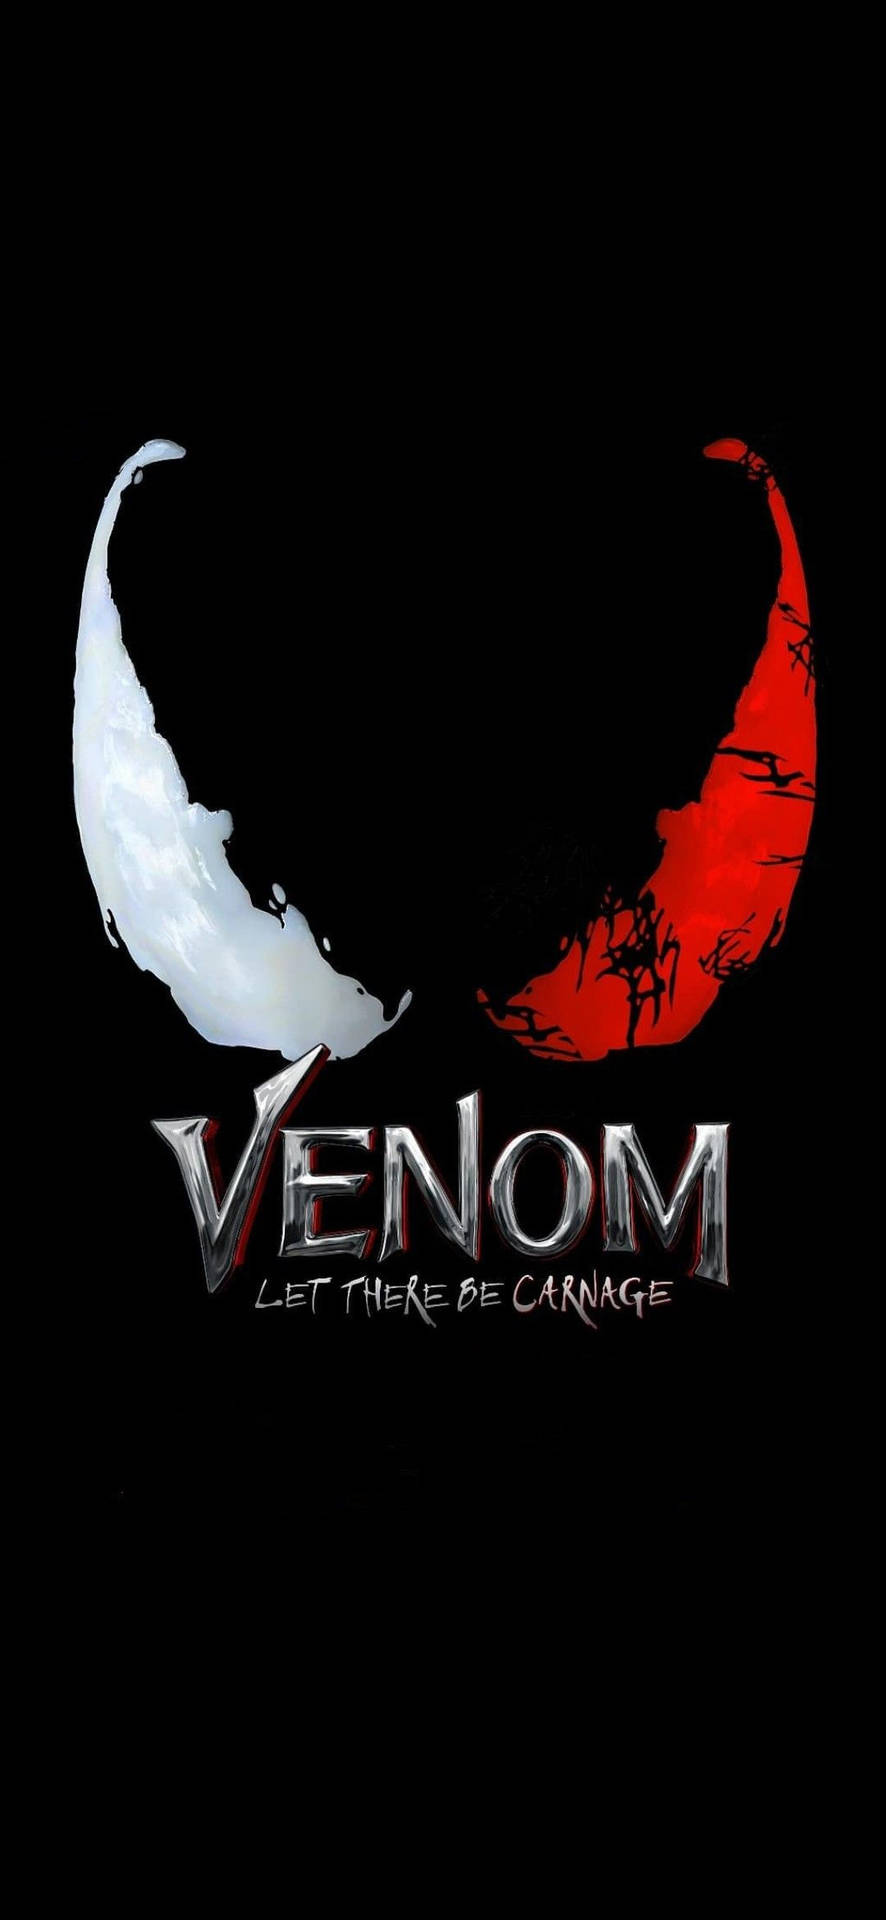 Venom Let There Be Carnage Redeye Background